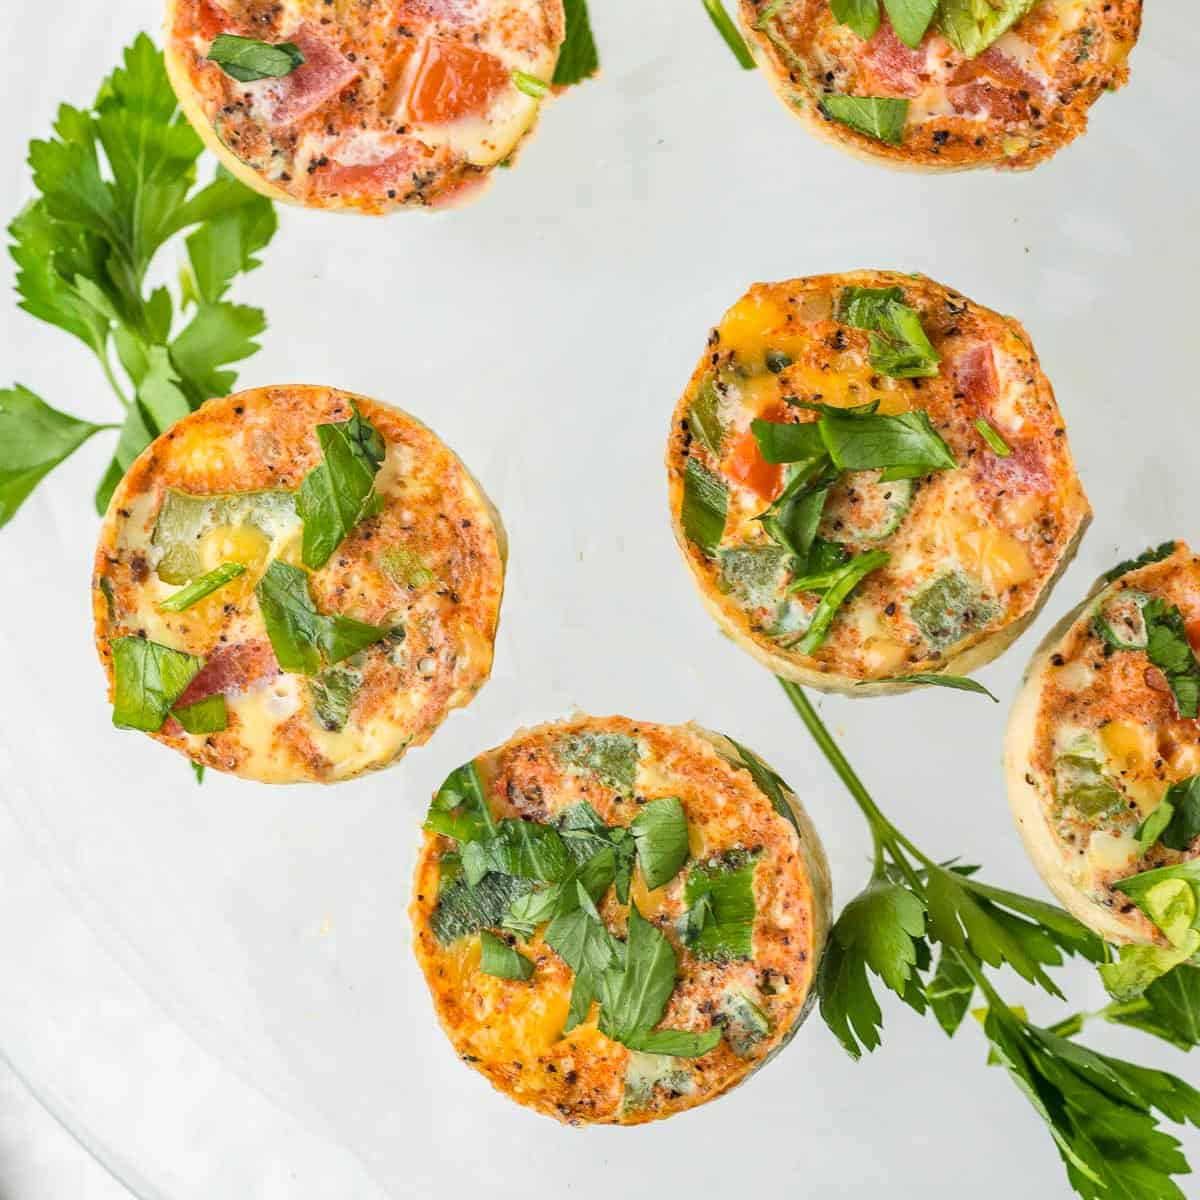 Instant Pot Egg Bites with Tex Mex flavors - Make It Skinny Please